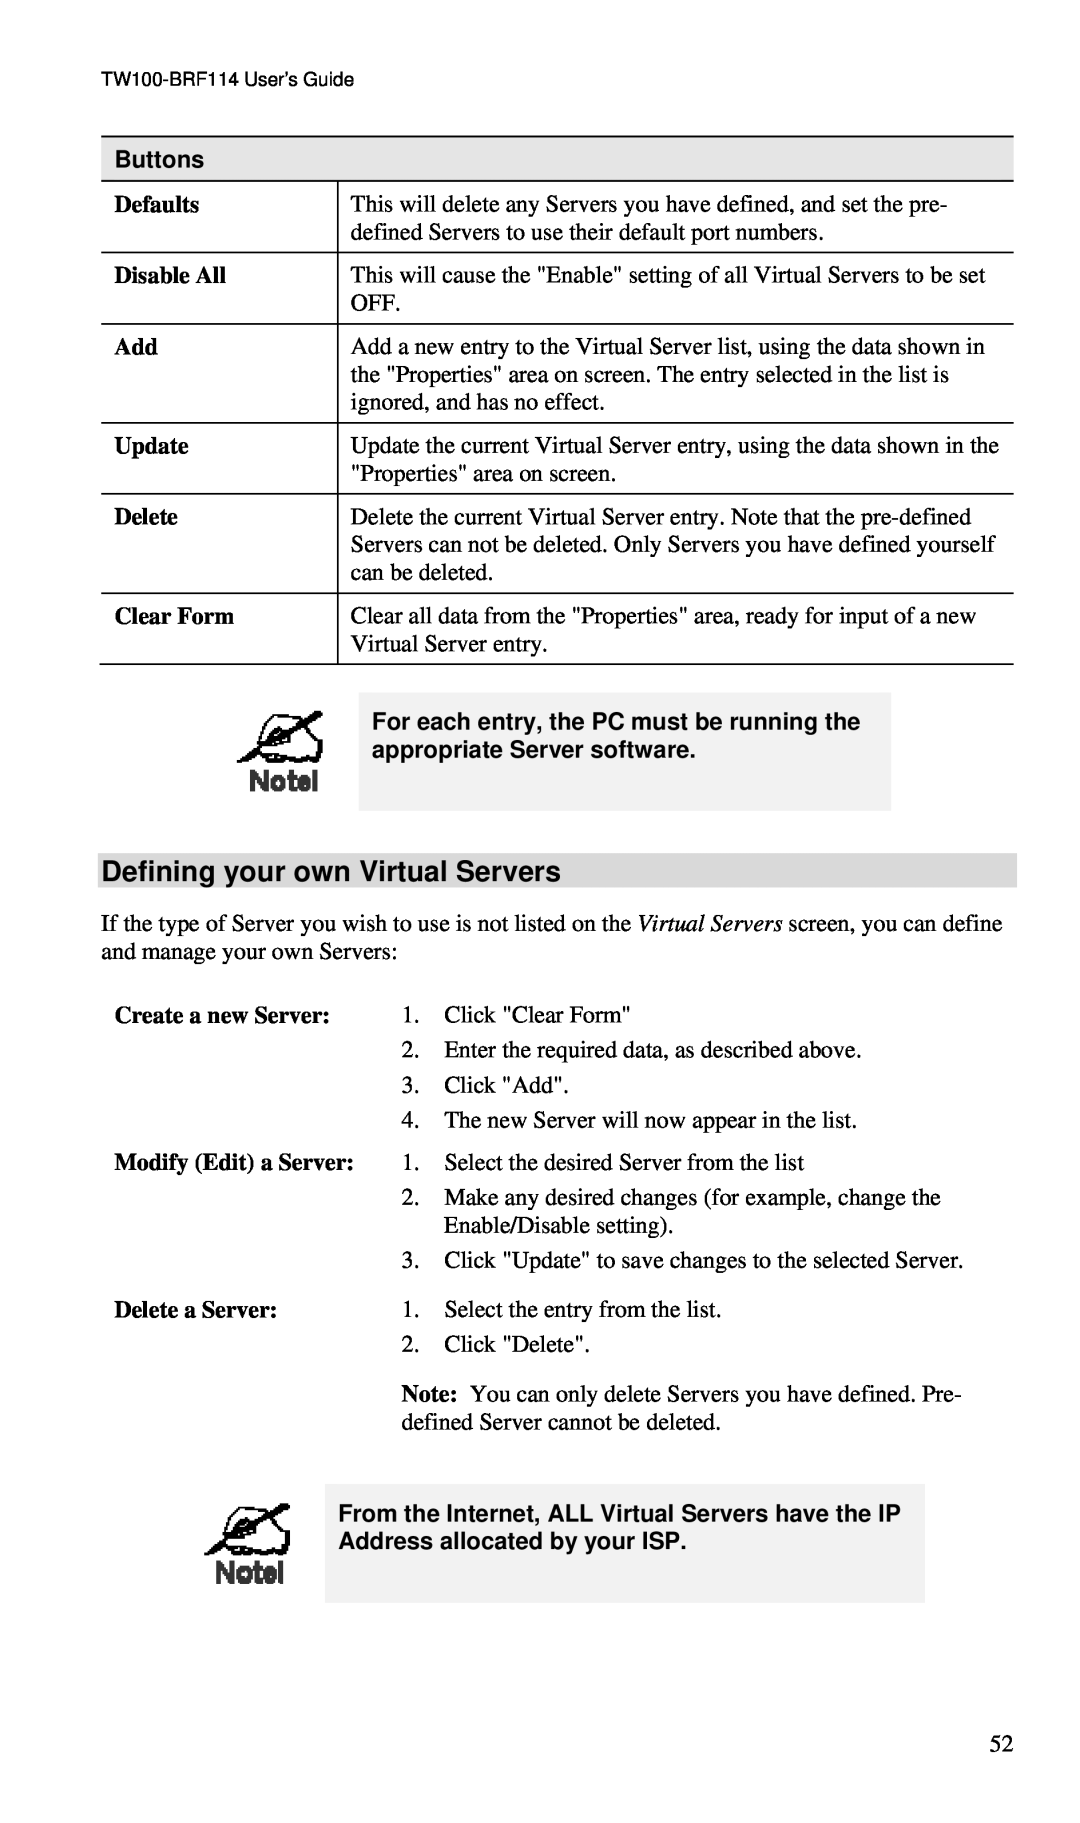 TRENDnet BRF114 manual Defining your own Virtual Servers, Buttons, Defaults, Disable All, Update, Delete, Clear Form 